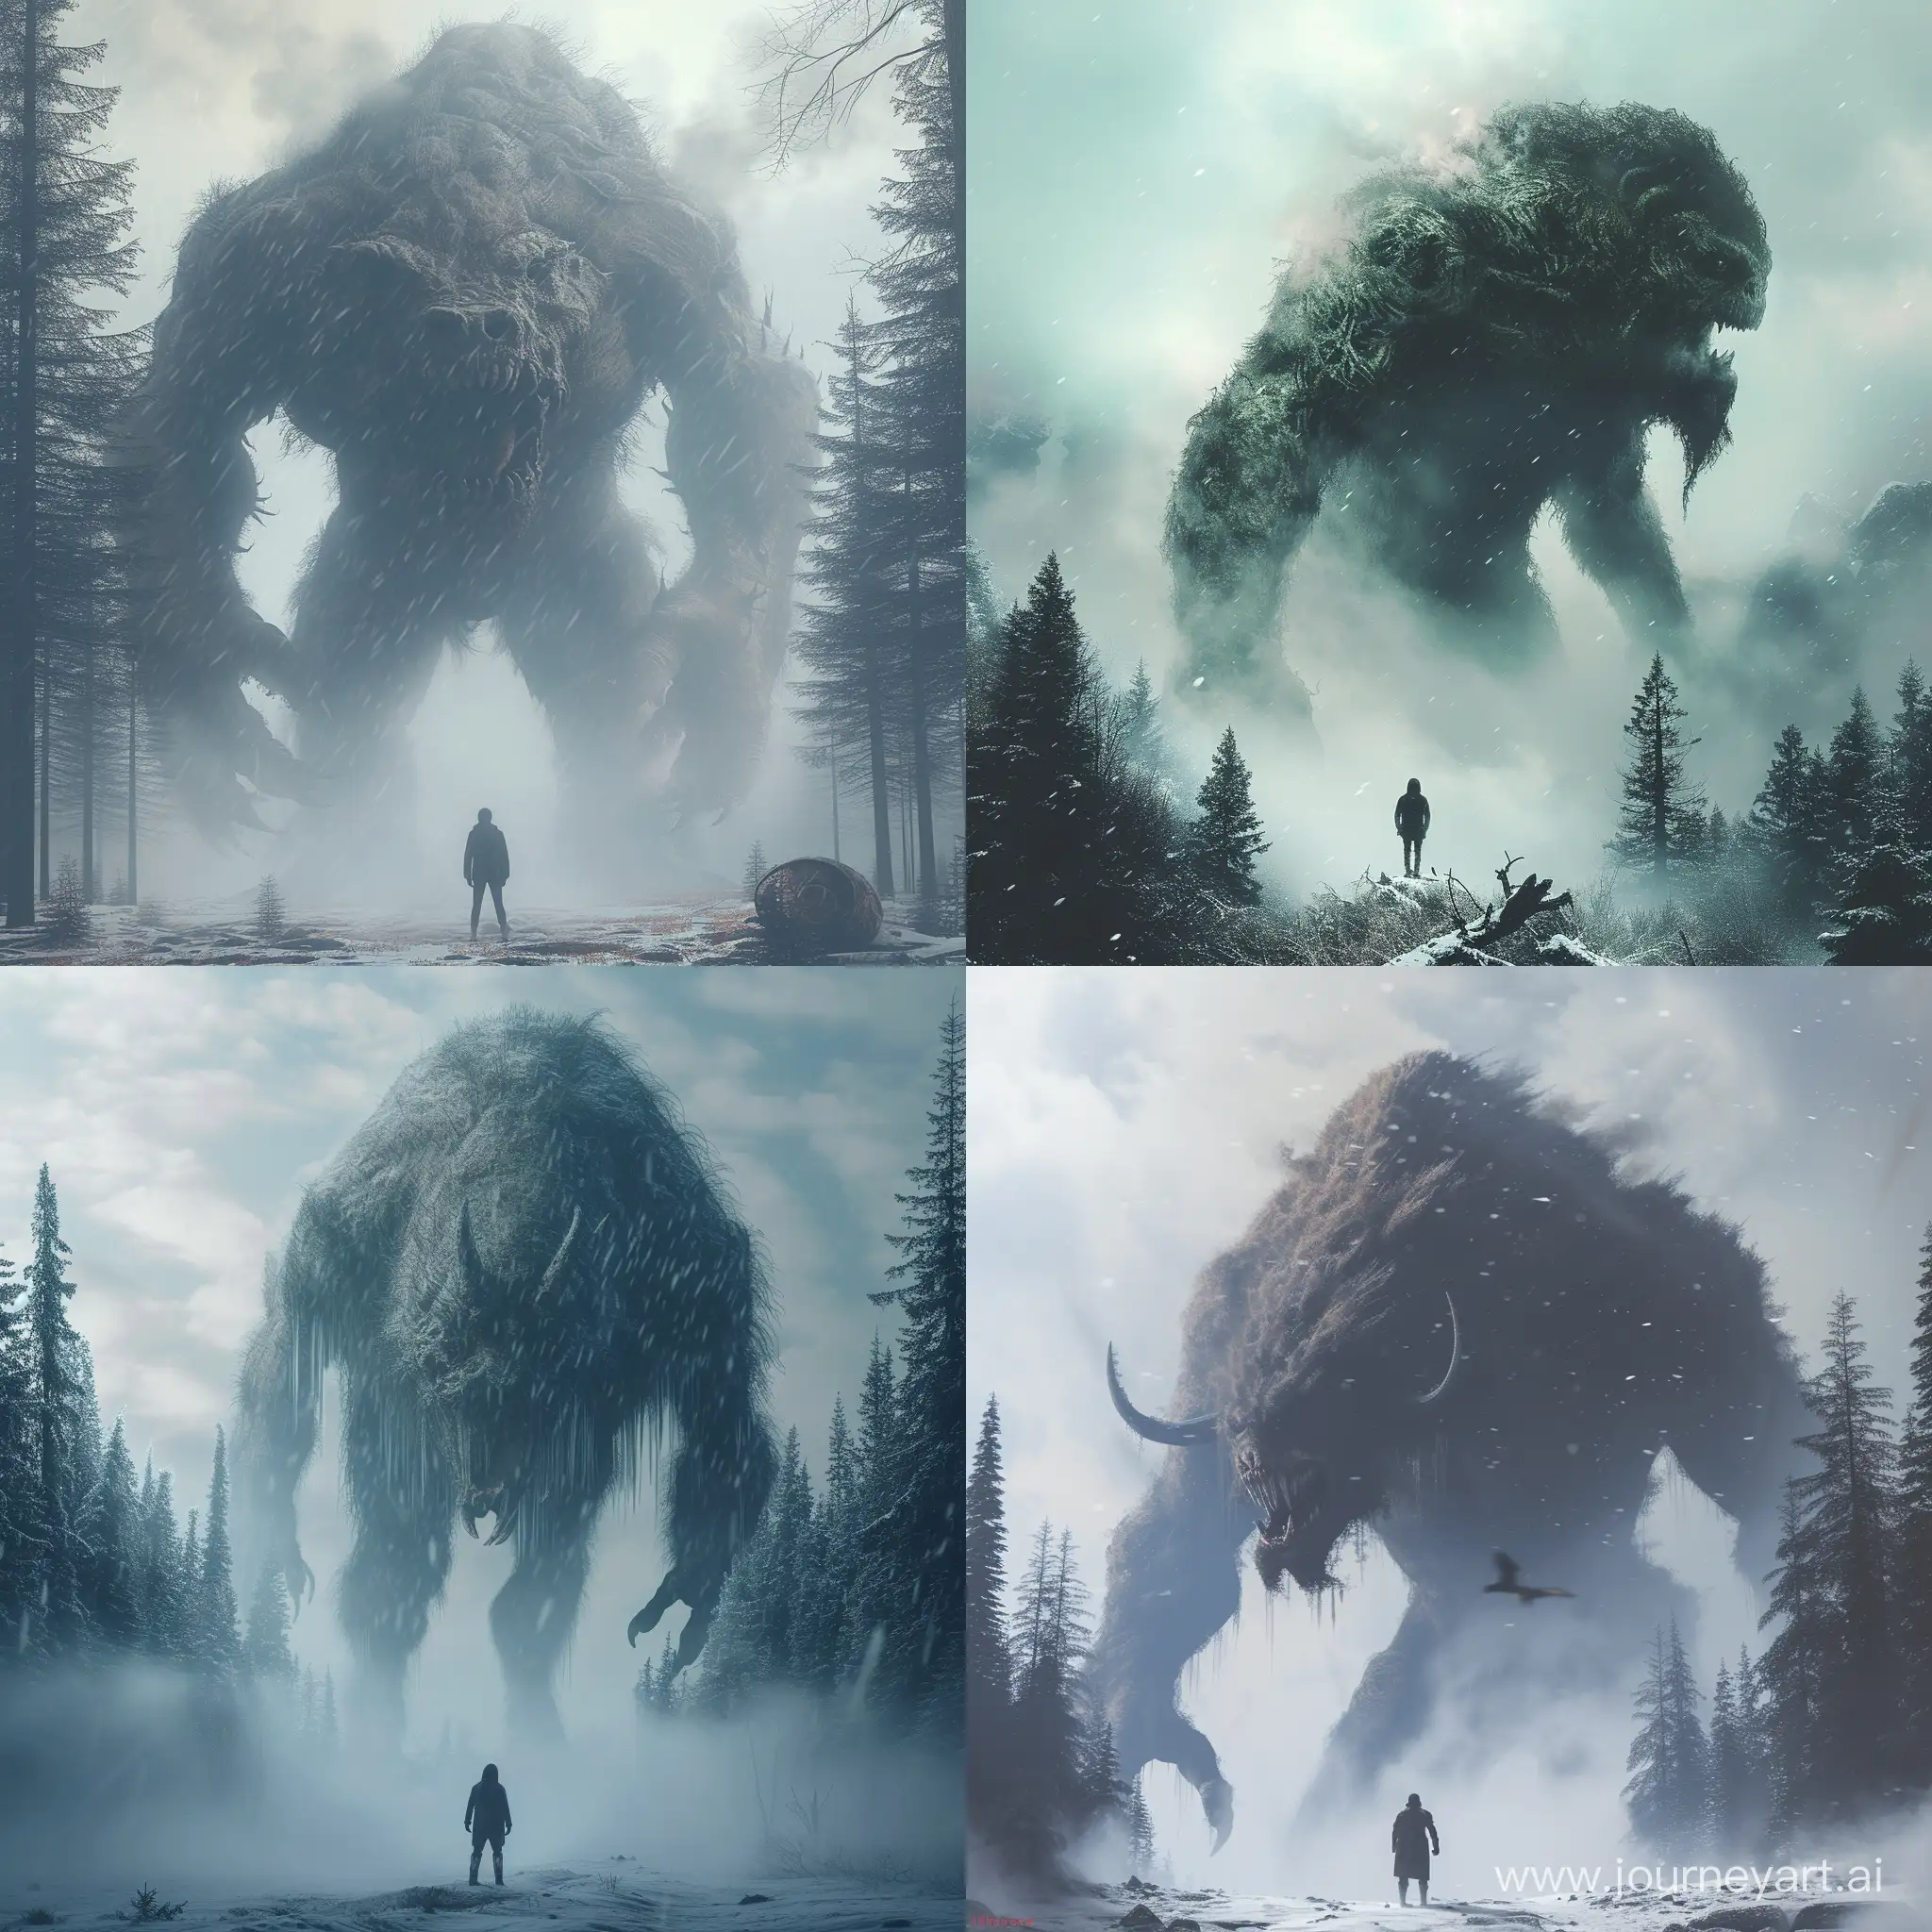 create image of A huge and very big creature in the middle of a foggy forest with tunder and snow standing in front of a normal human, with the picture being realistic, full of details, saturated with colors and lighting, and some dramatic